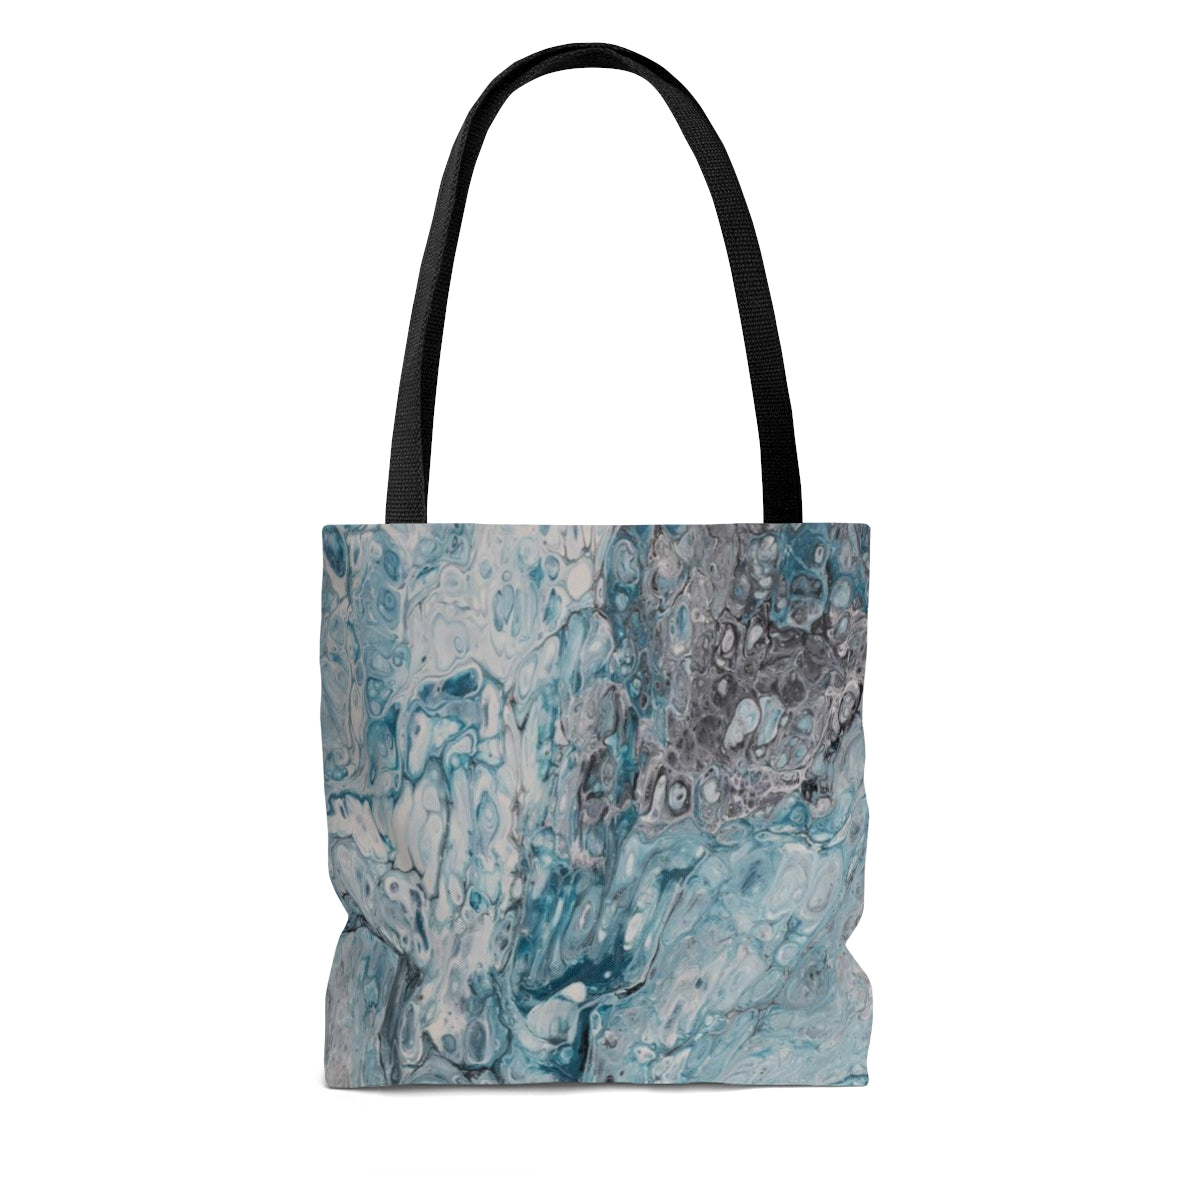 Blueberry Ice Tote Bag